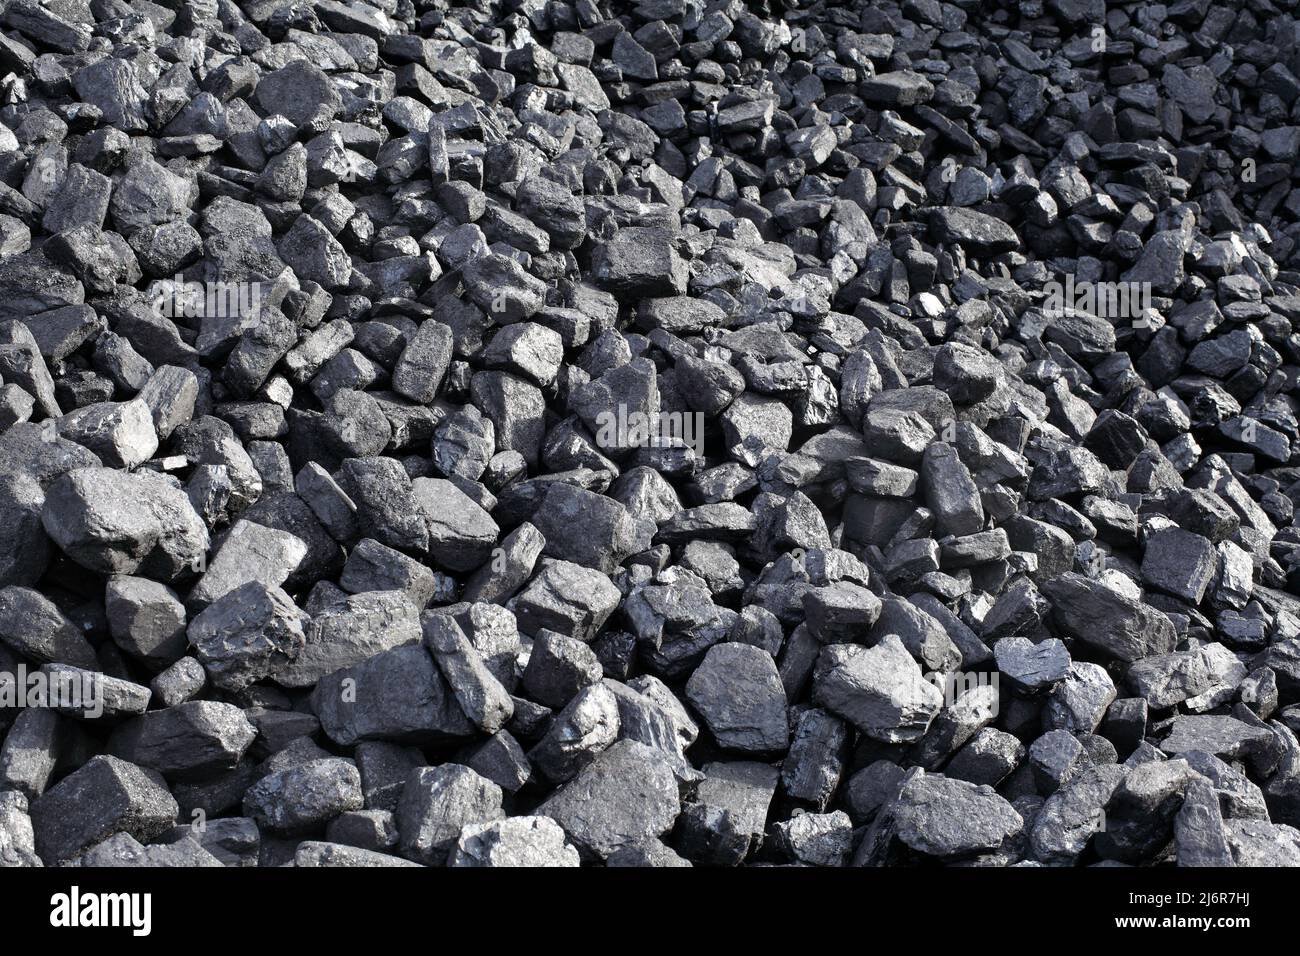 A stockpile of coal for steam locomotives, at a heritage railway depot. Stock Photo